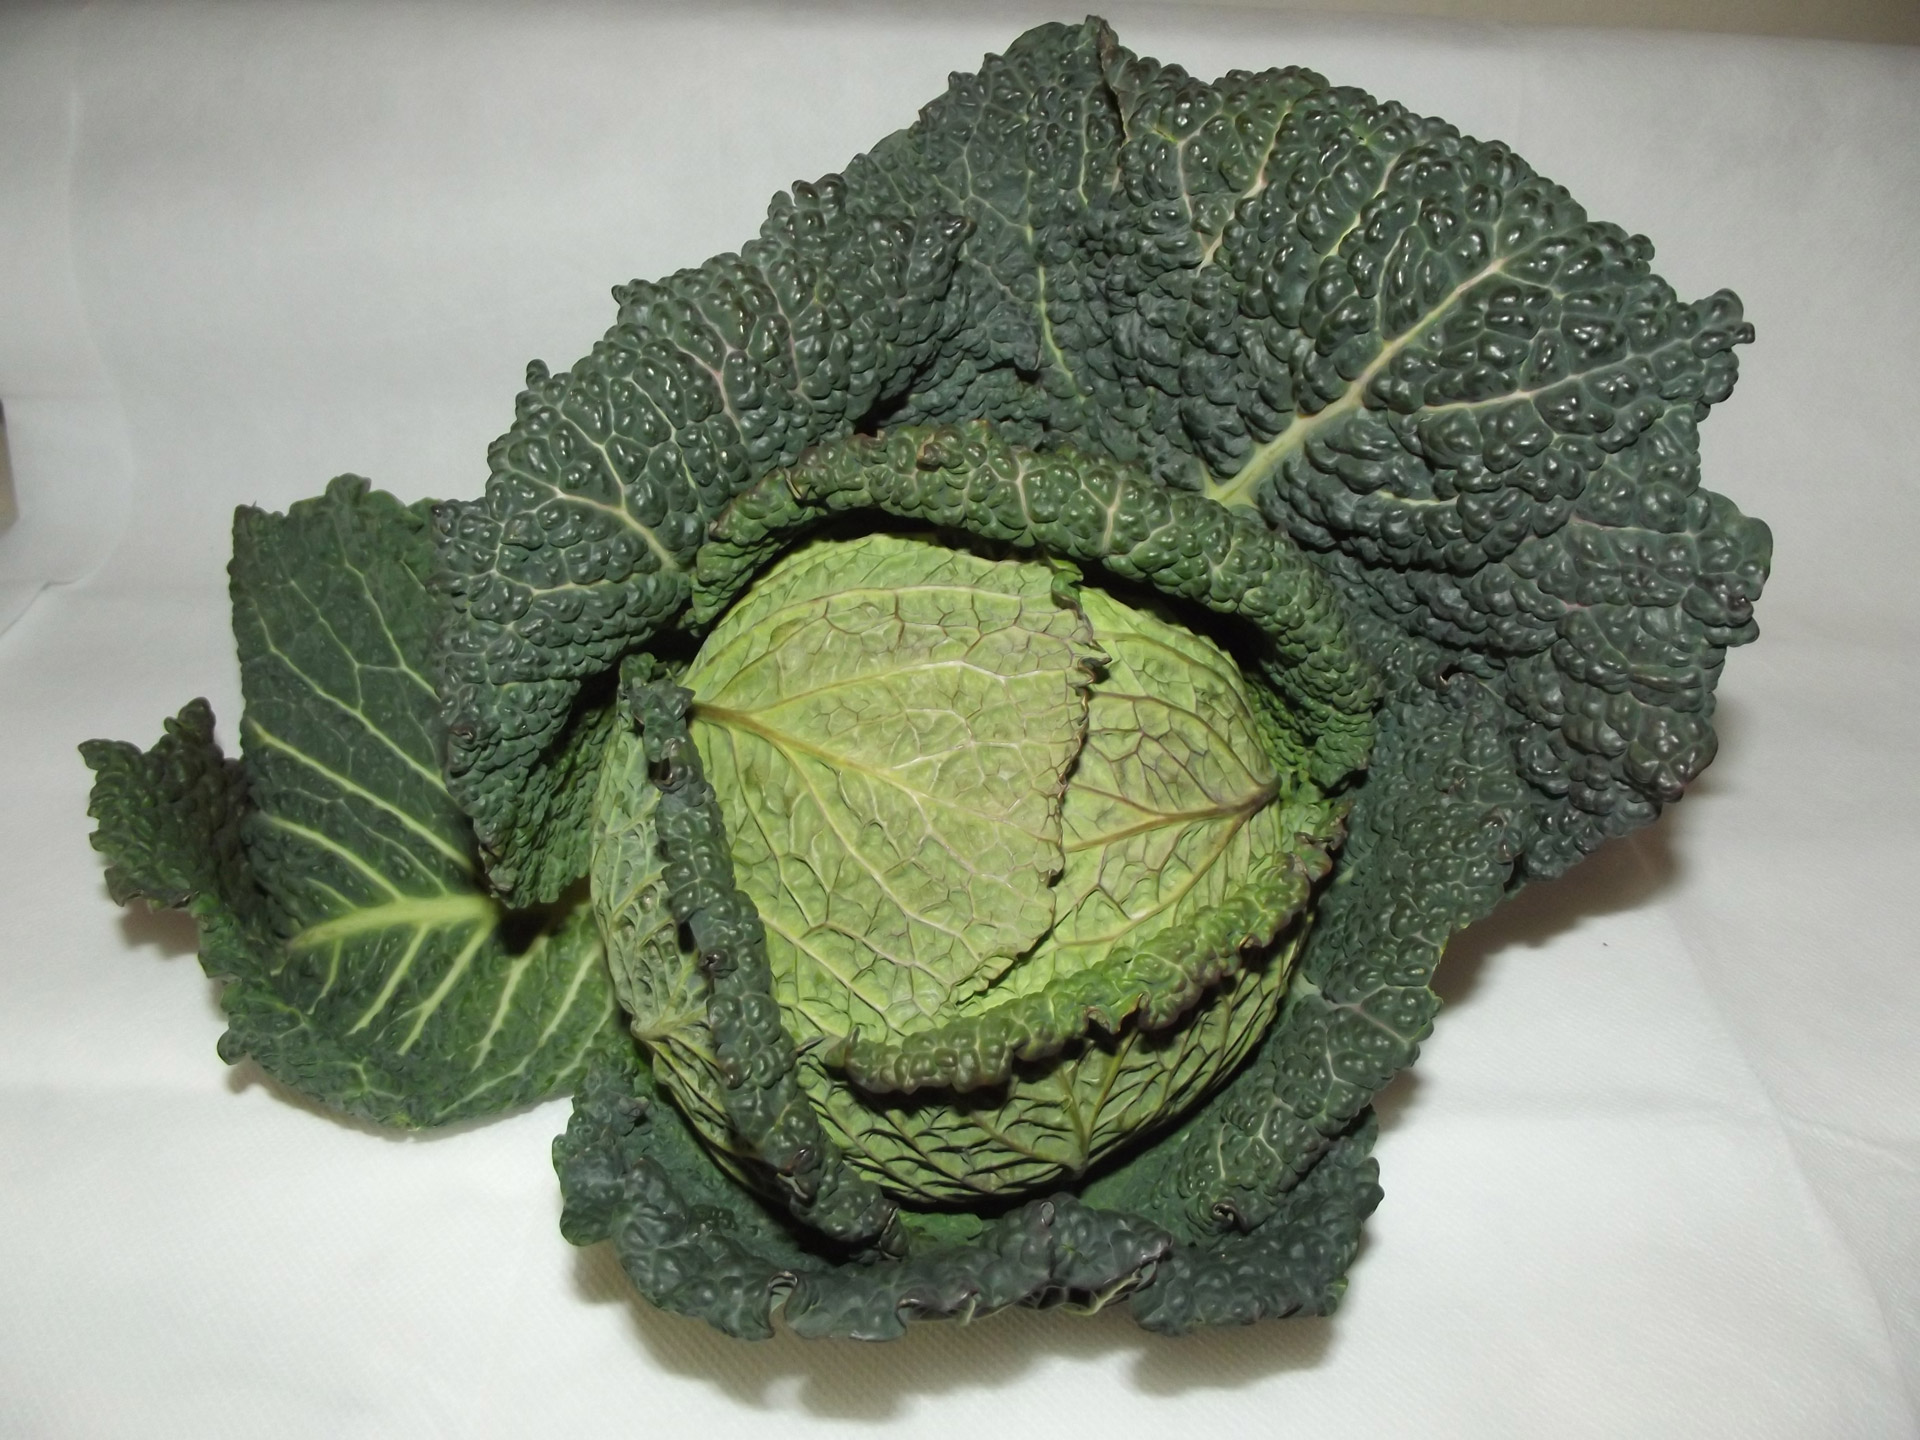 Green Leafy Cabbage